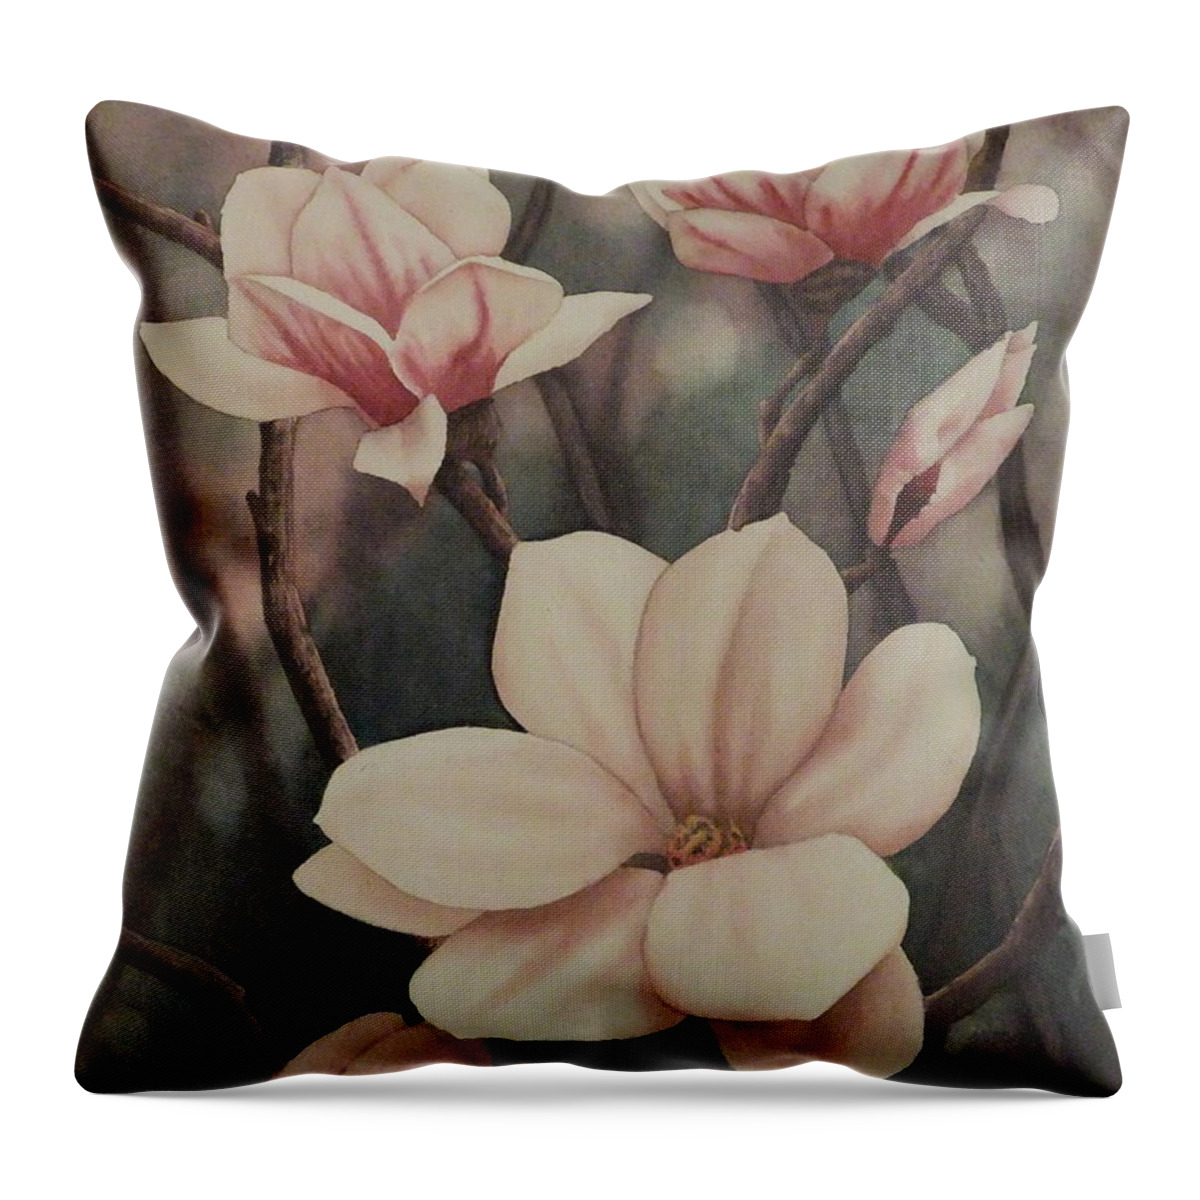 Watercolor Throw Pillow featuring the painting Magnolia Serenade by Karen Richardson